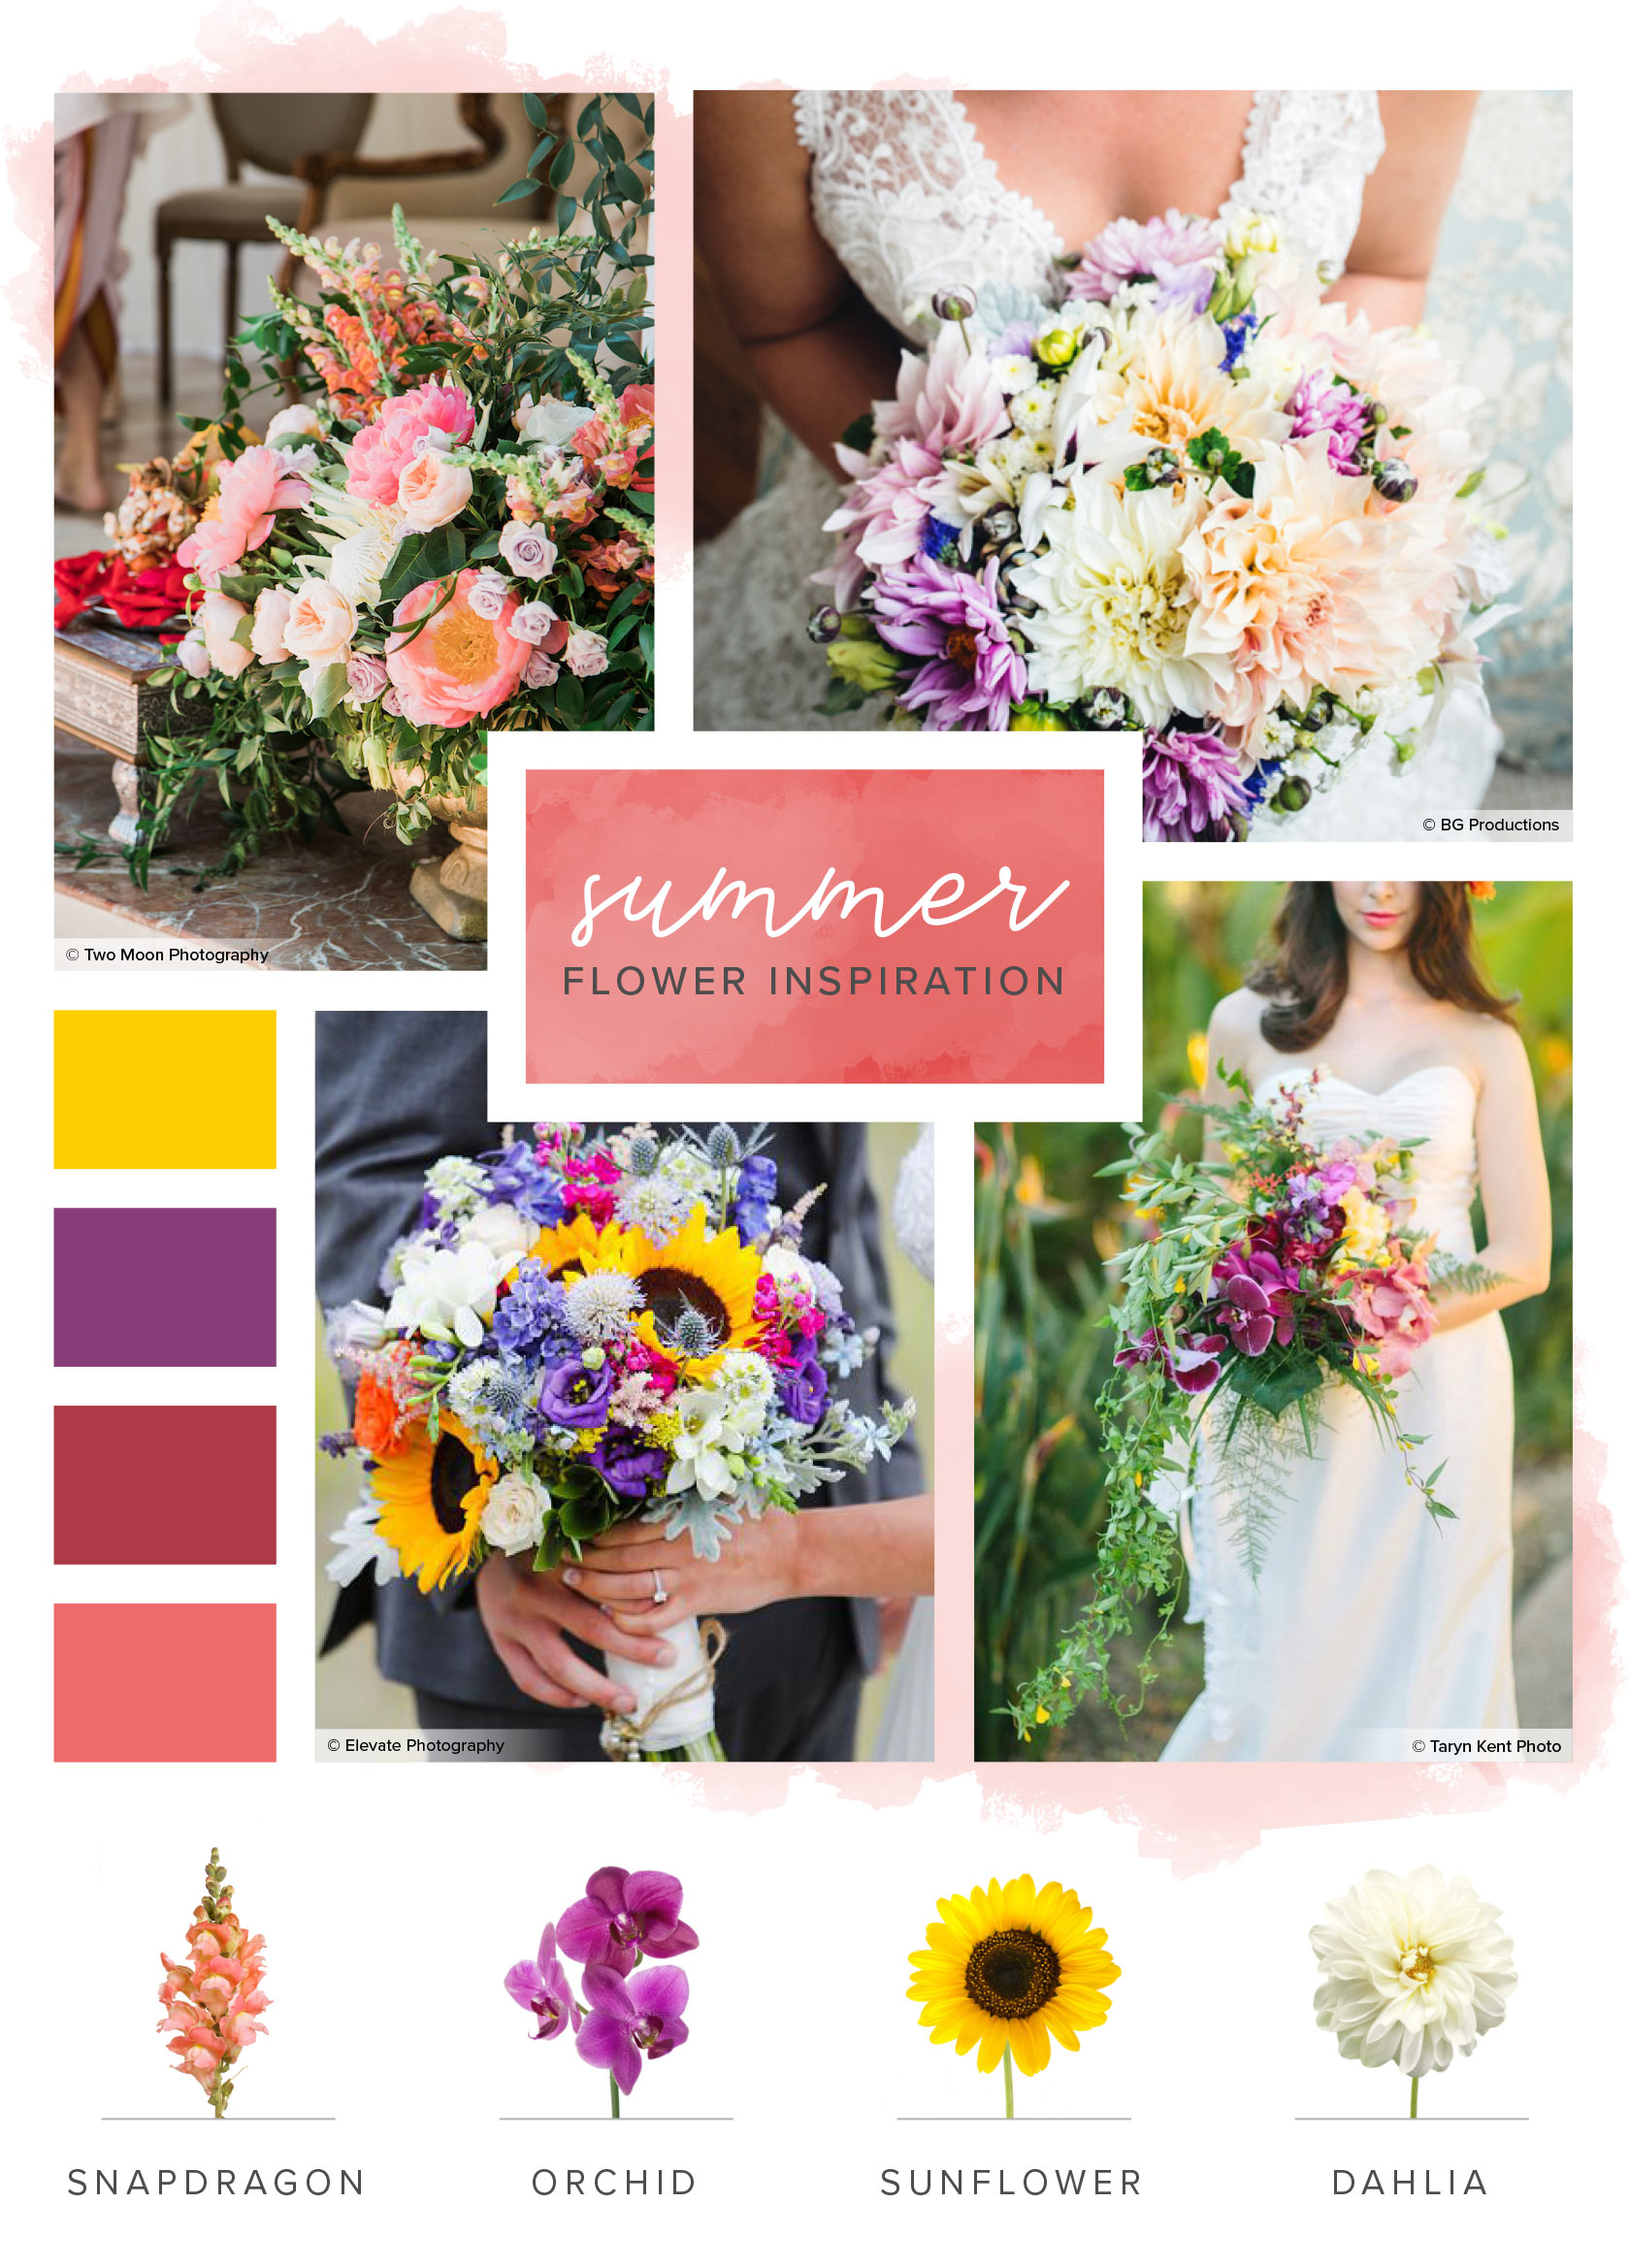 A Seasonal Guide to Minimize Your Wedding Flower Costs. Summer Flowers Bridal Bouquet and Color Scheme Inspiration. // mysweetengagement.com